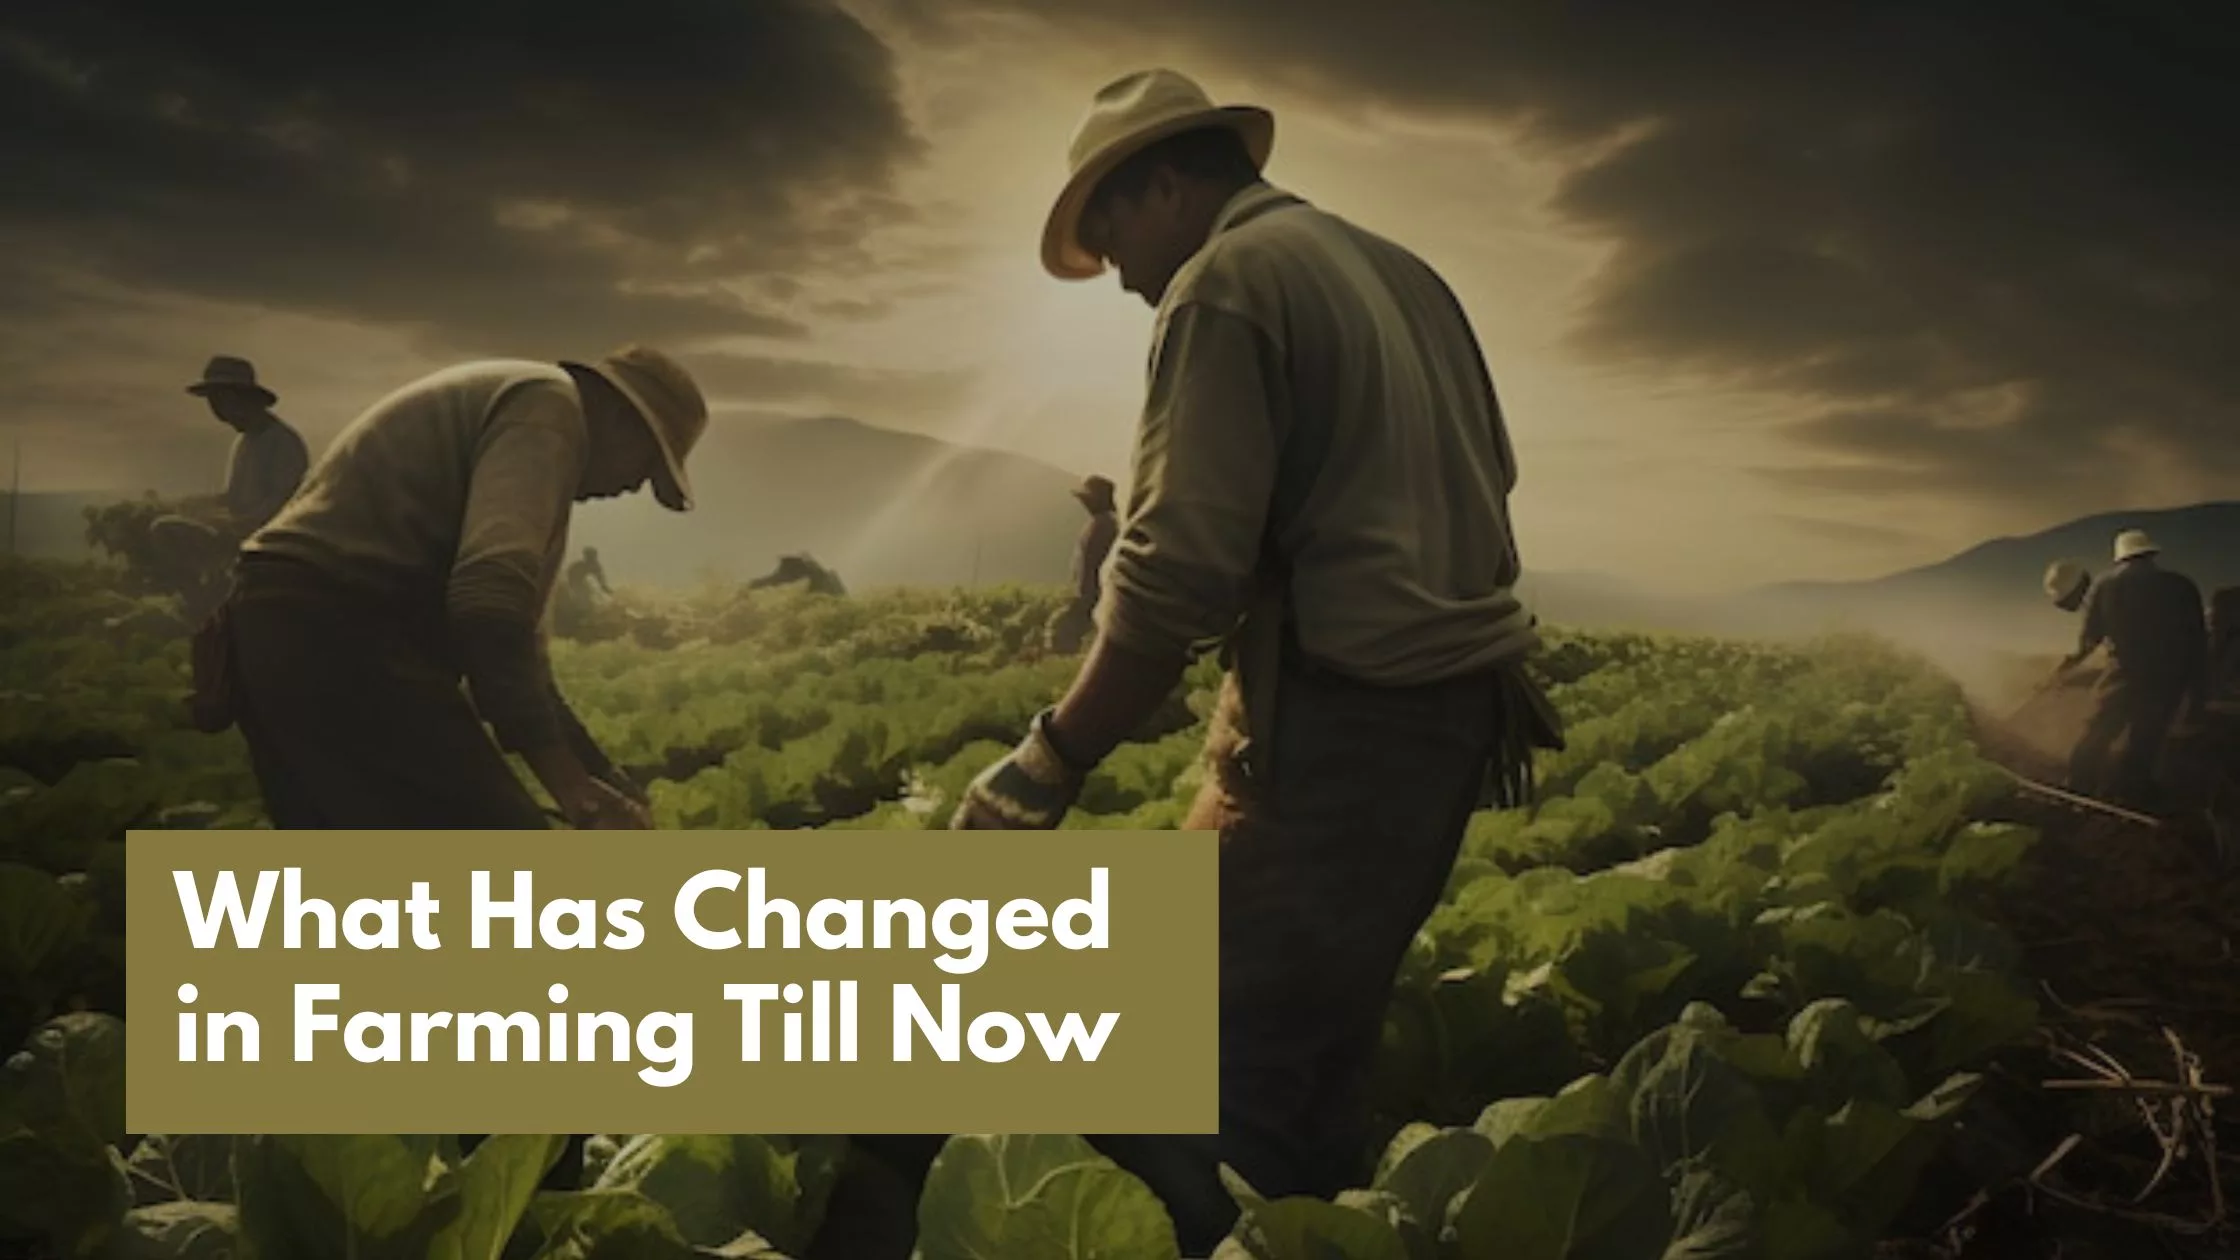 What Has Changed in Farming Till Now